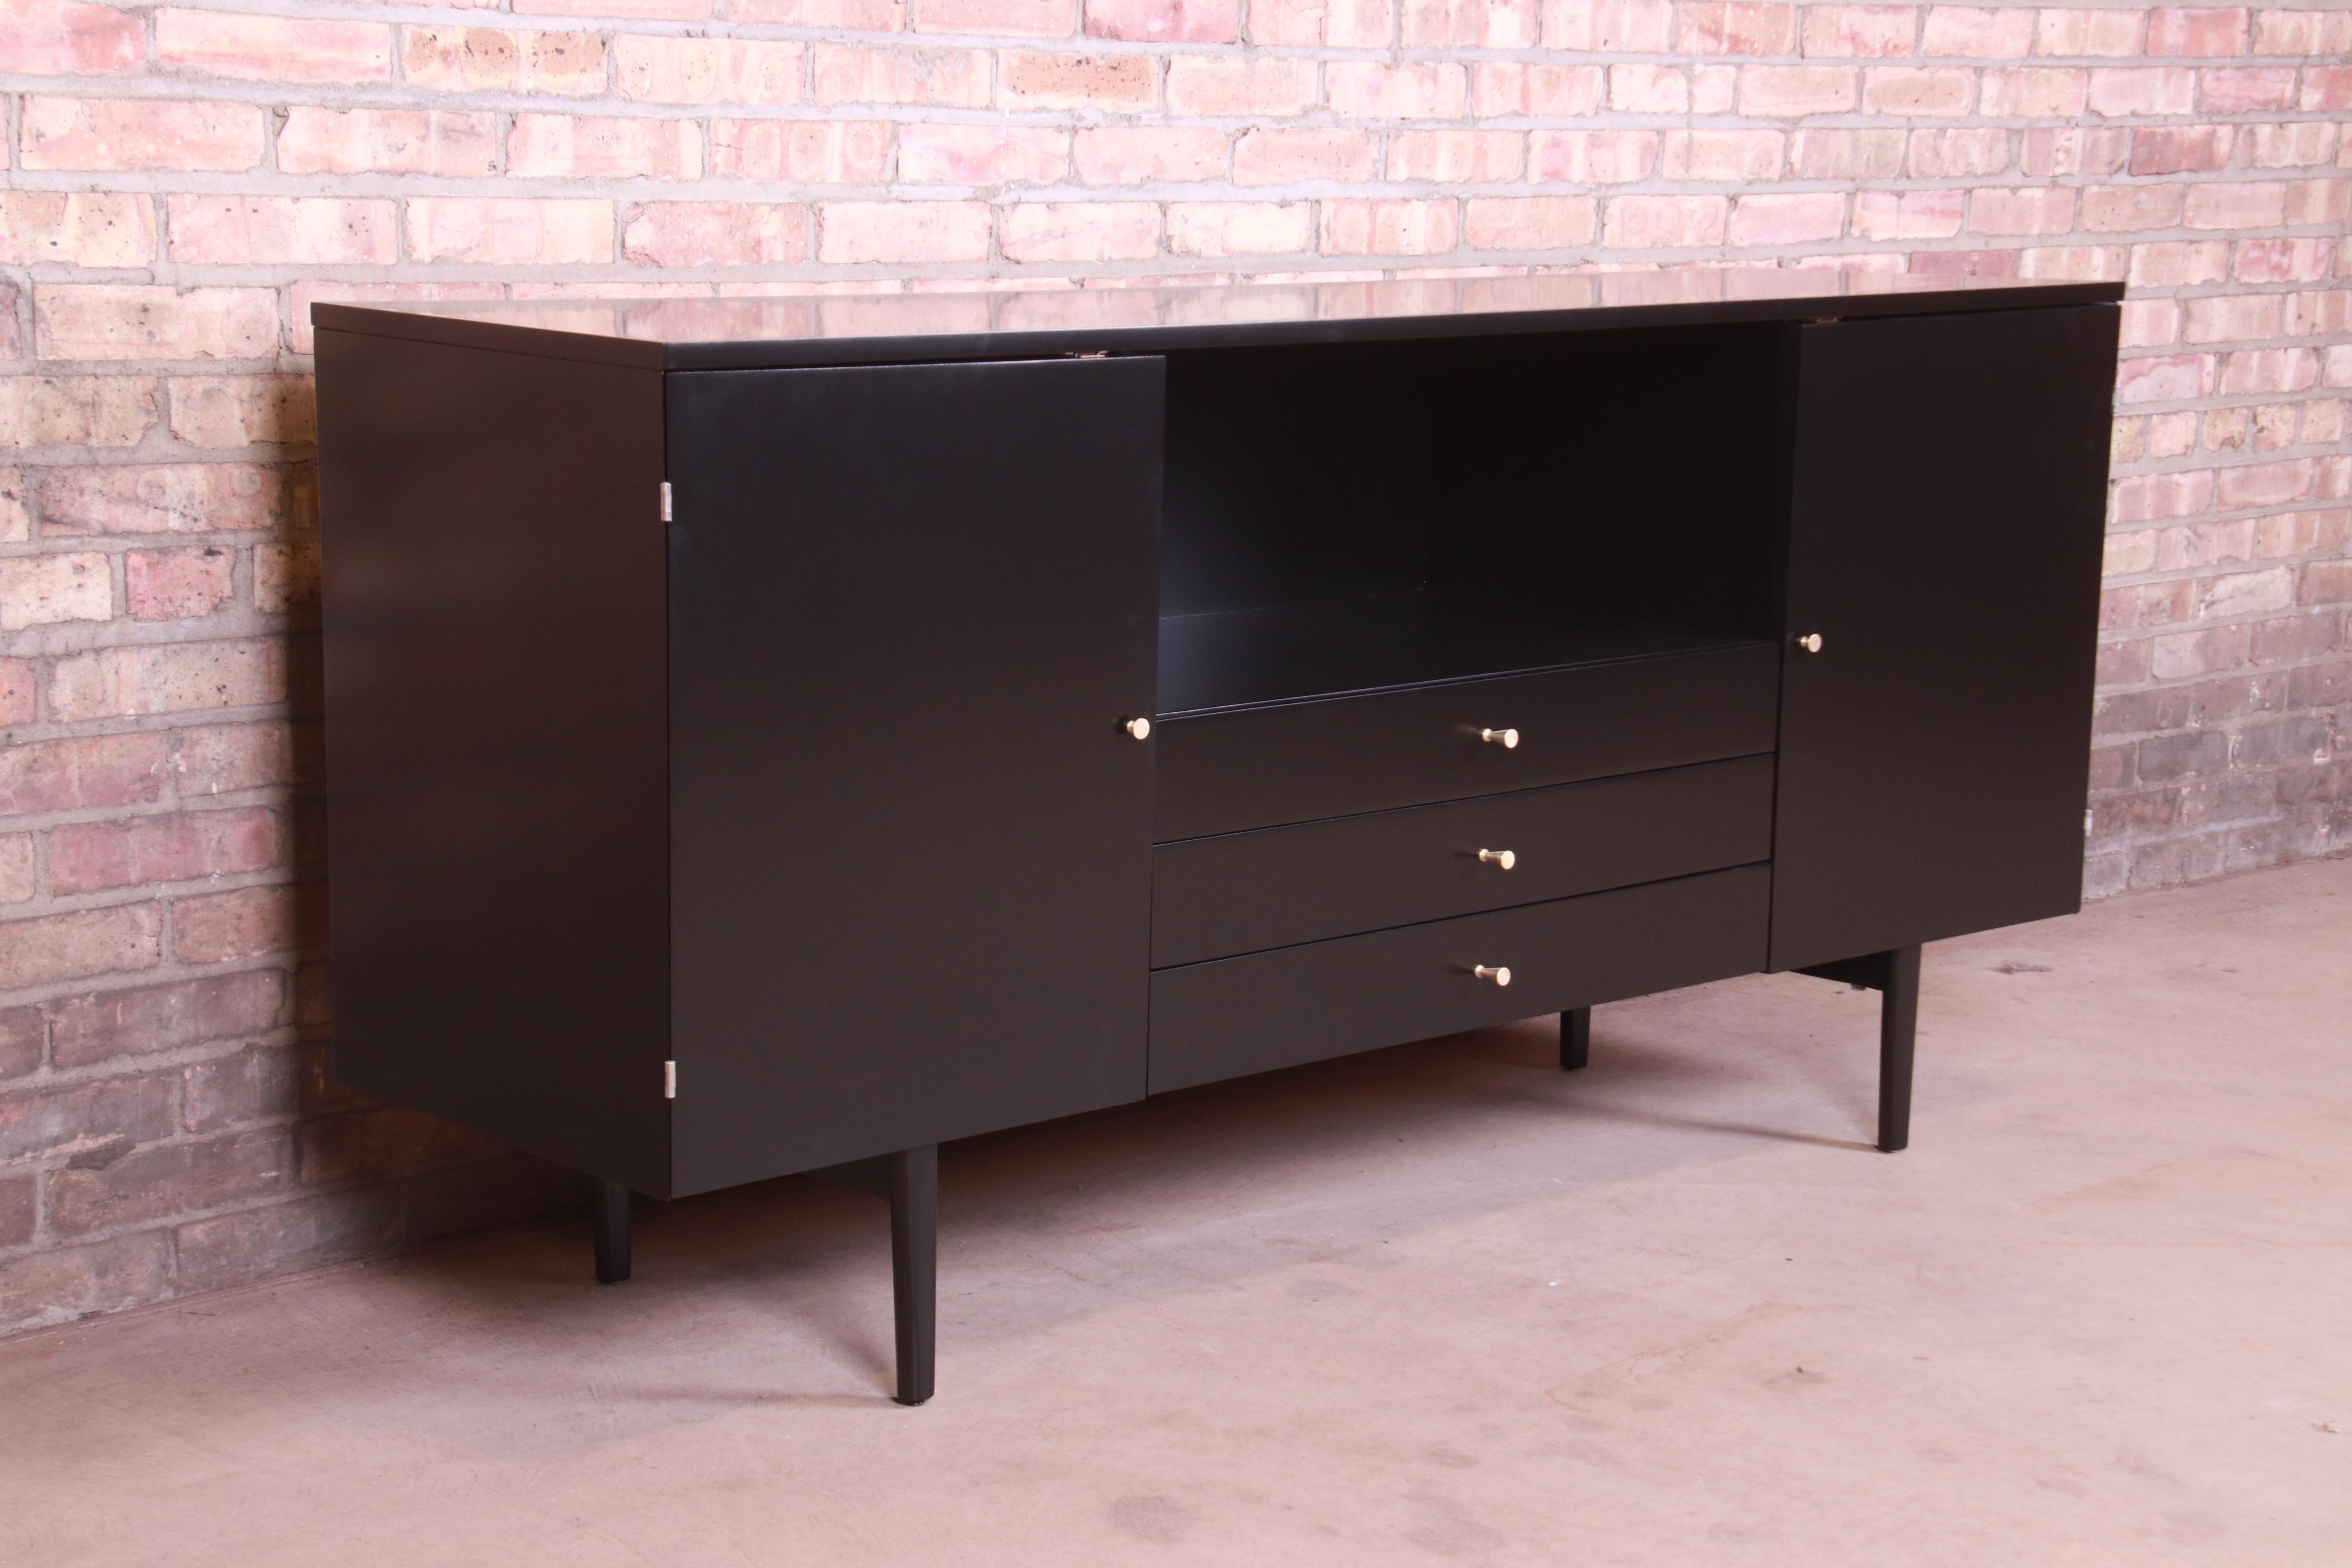 Mid-20th Century Paul McCobb Planner Group Black Lacquered Credenza or Media Cabinet, Refinished